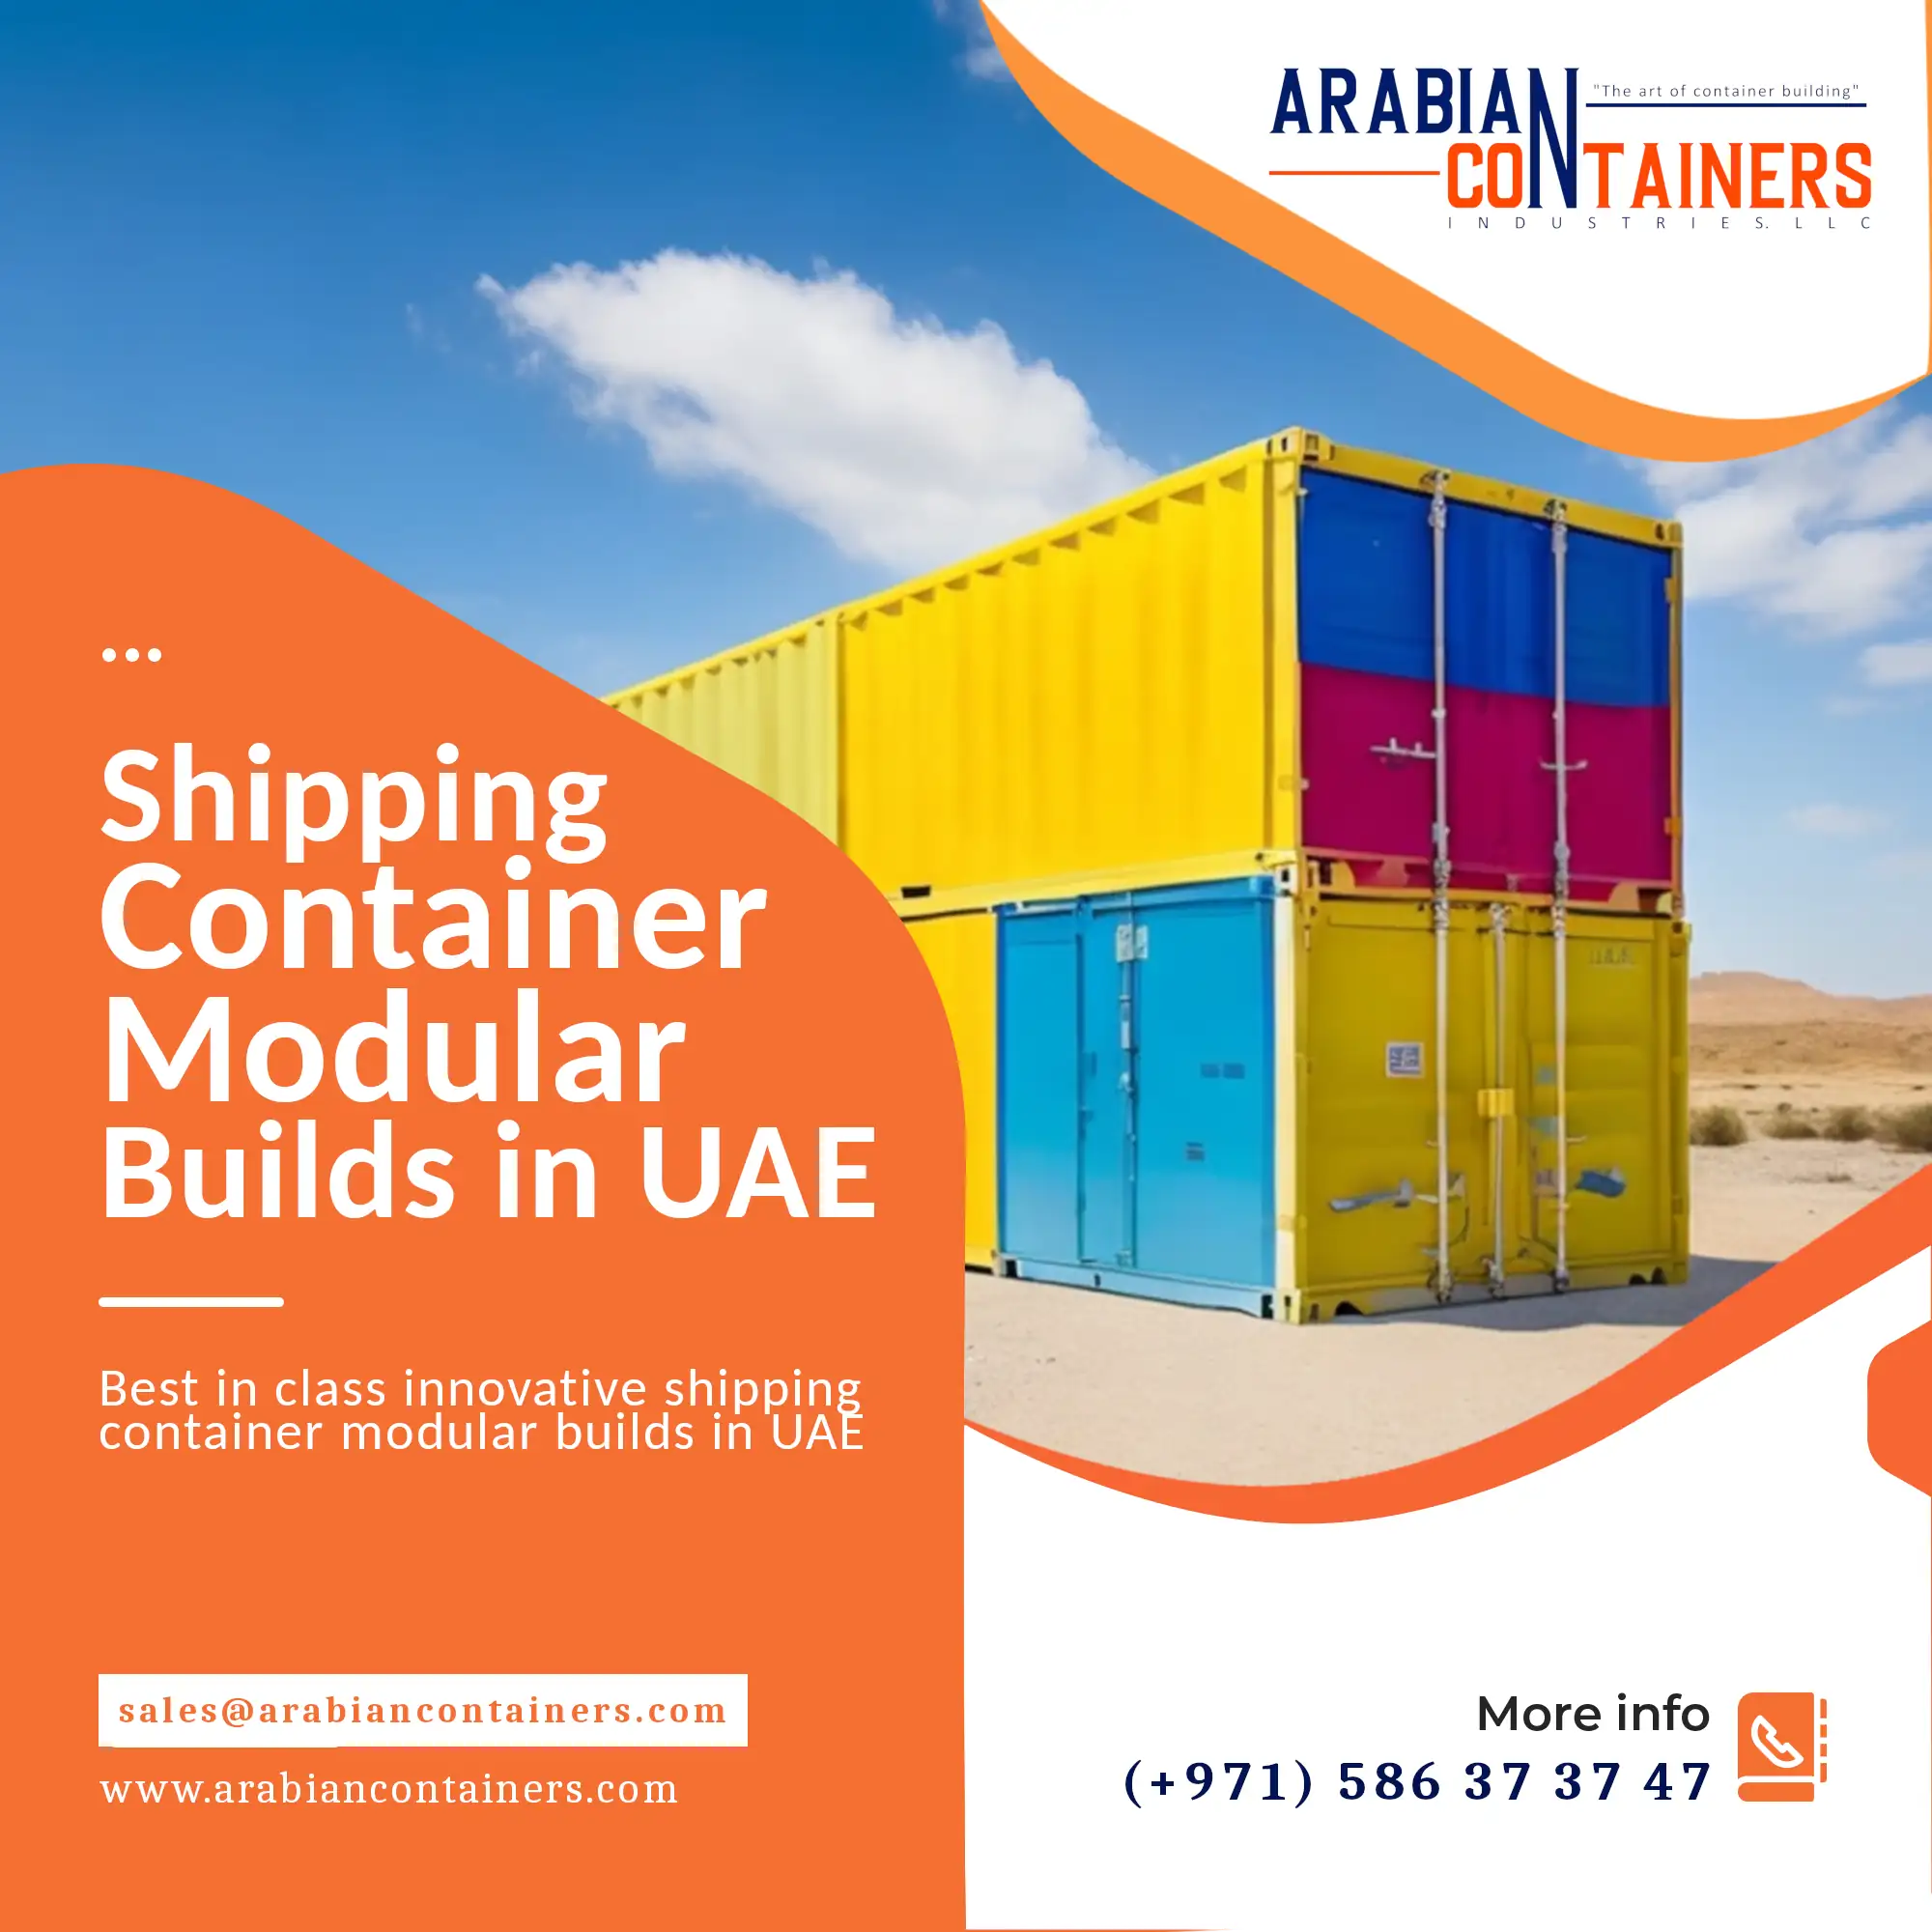 Building Solutions using Container Conversions.